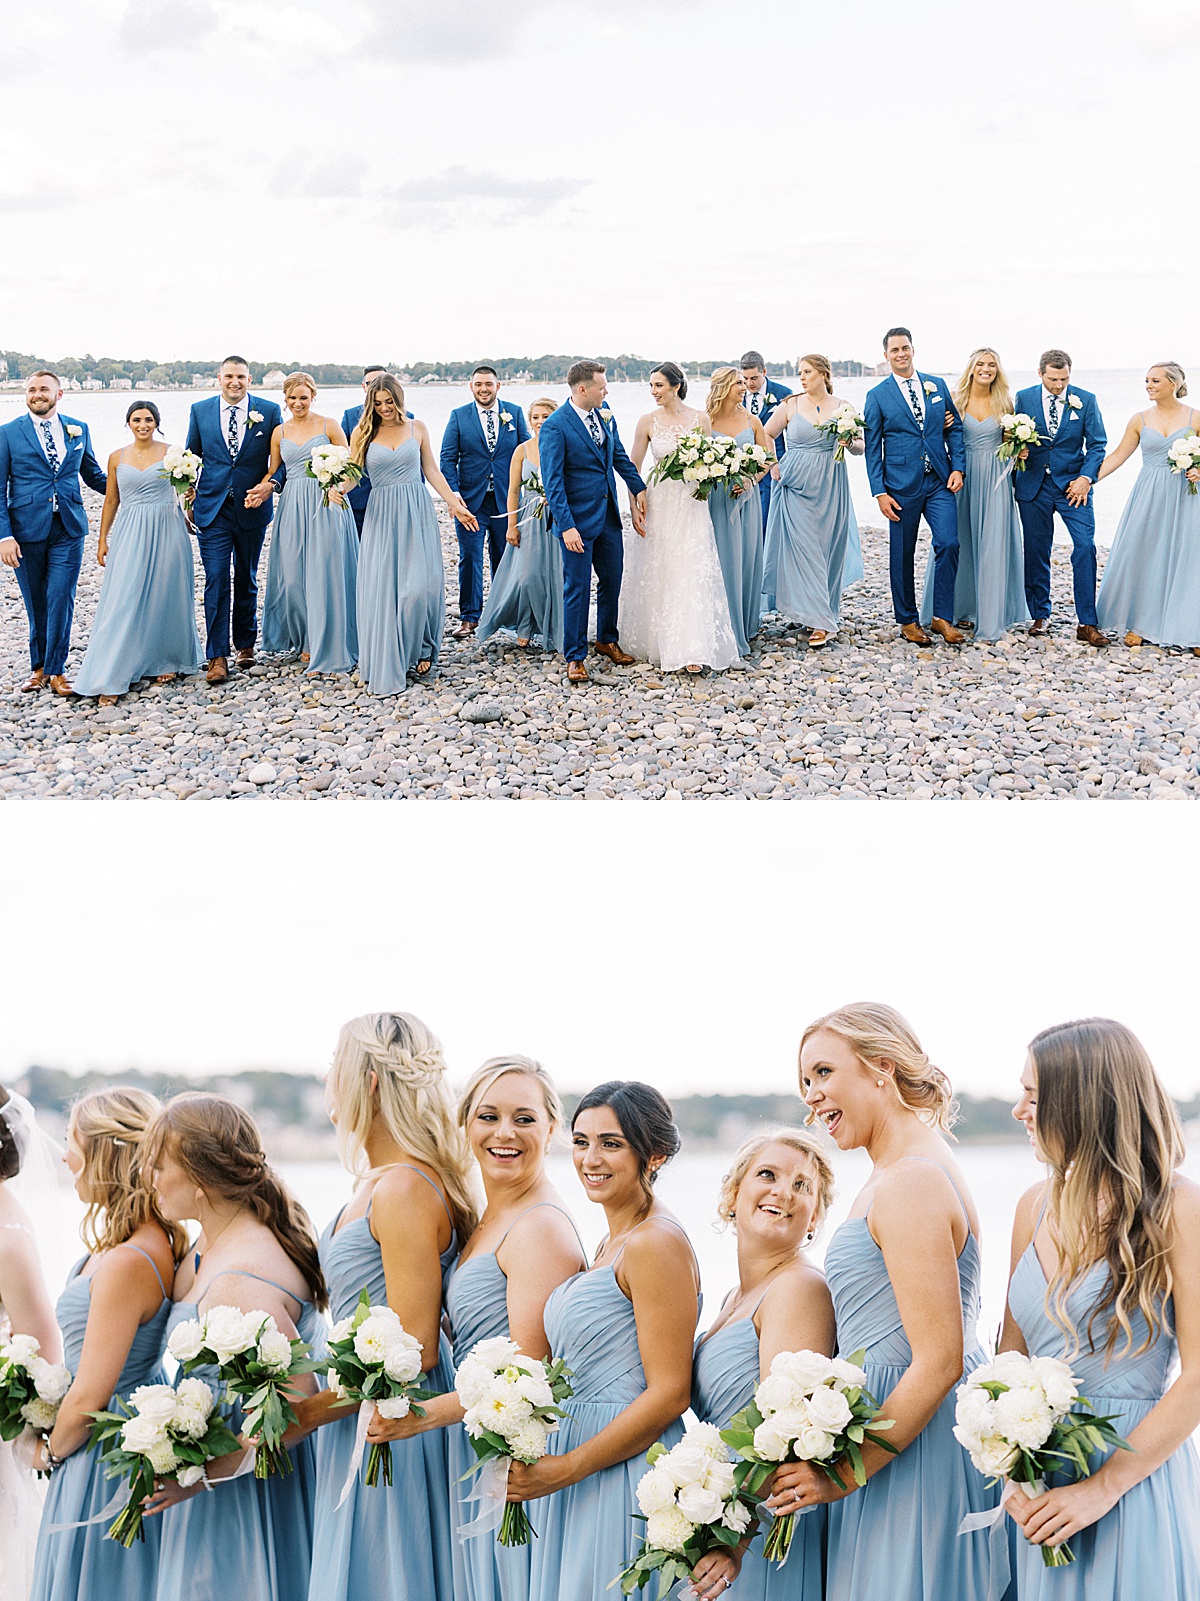 wedding party in dark and light blue with white rose bouquets walk shoreline with bride and groom | Lynne Reznick Photography